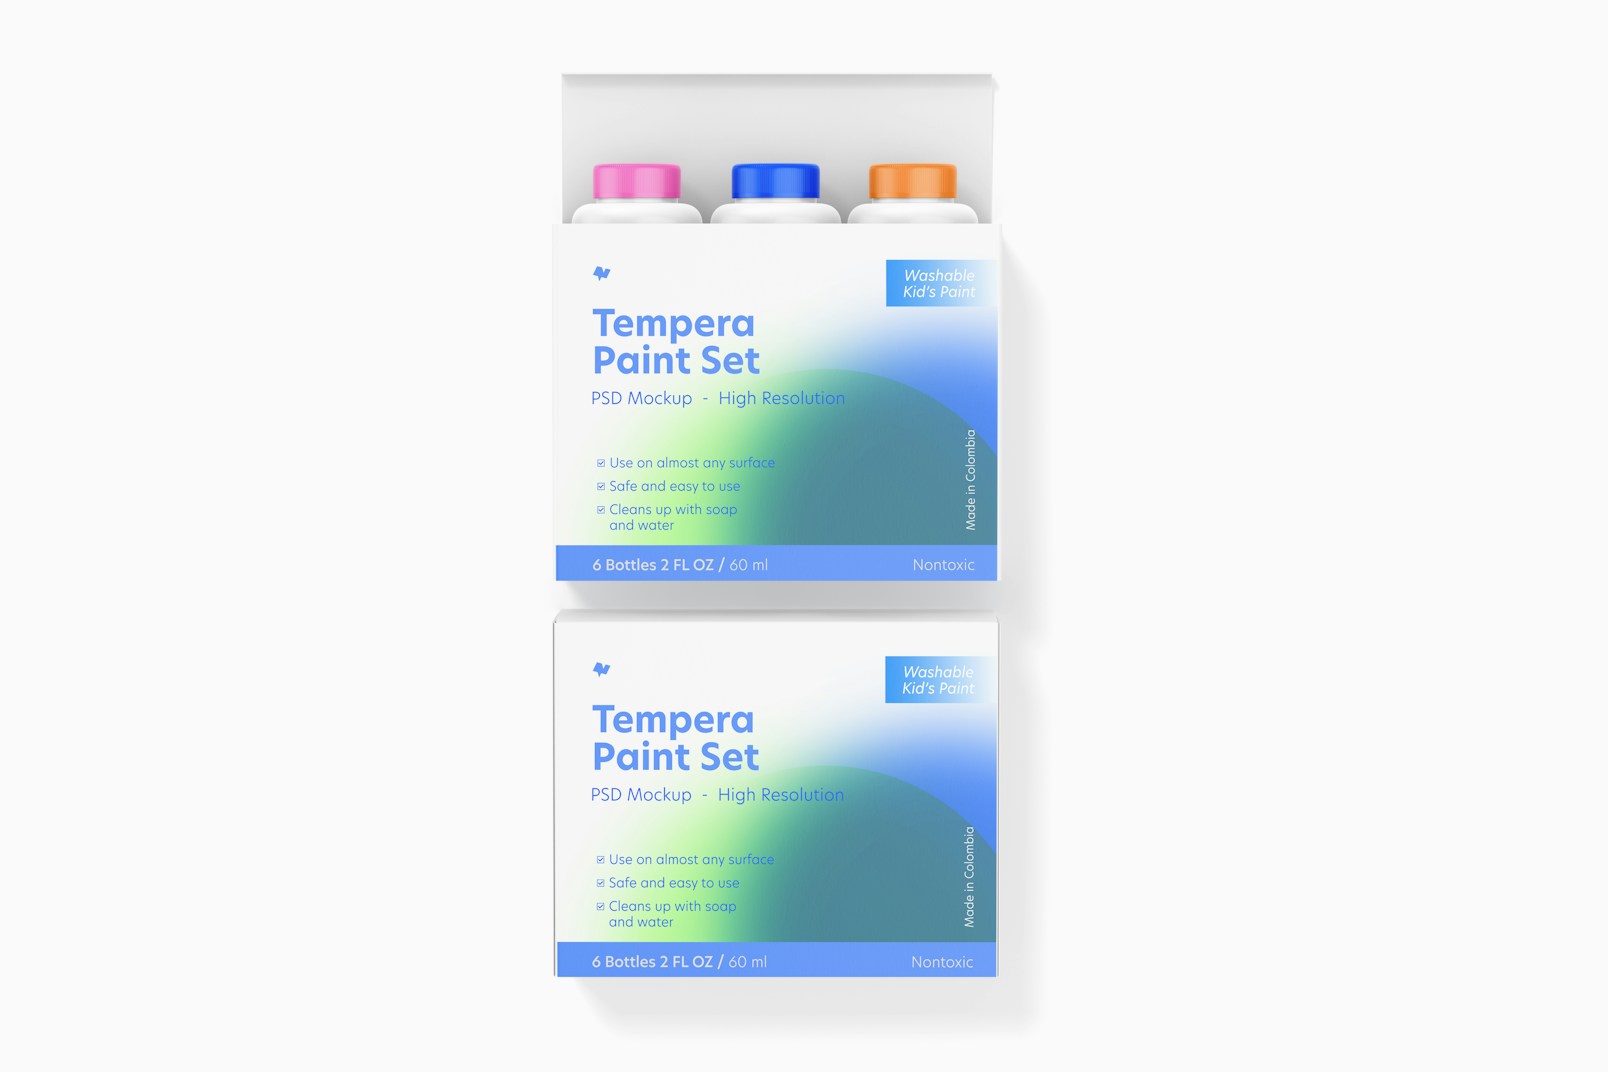 Tempera Paint Set Mockup, Opened and Closed